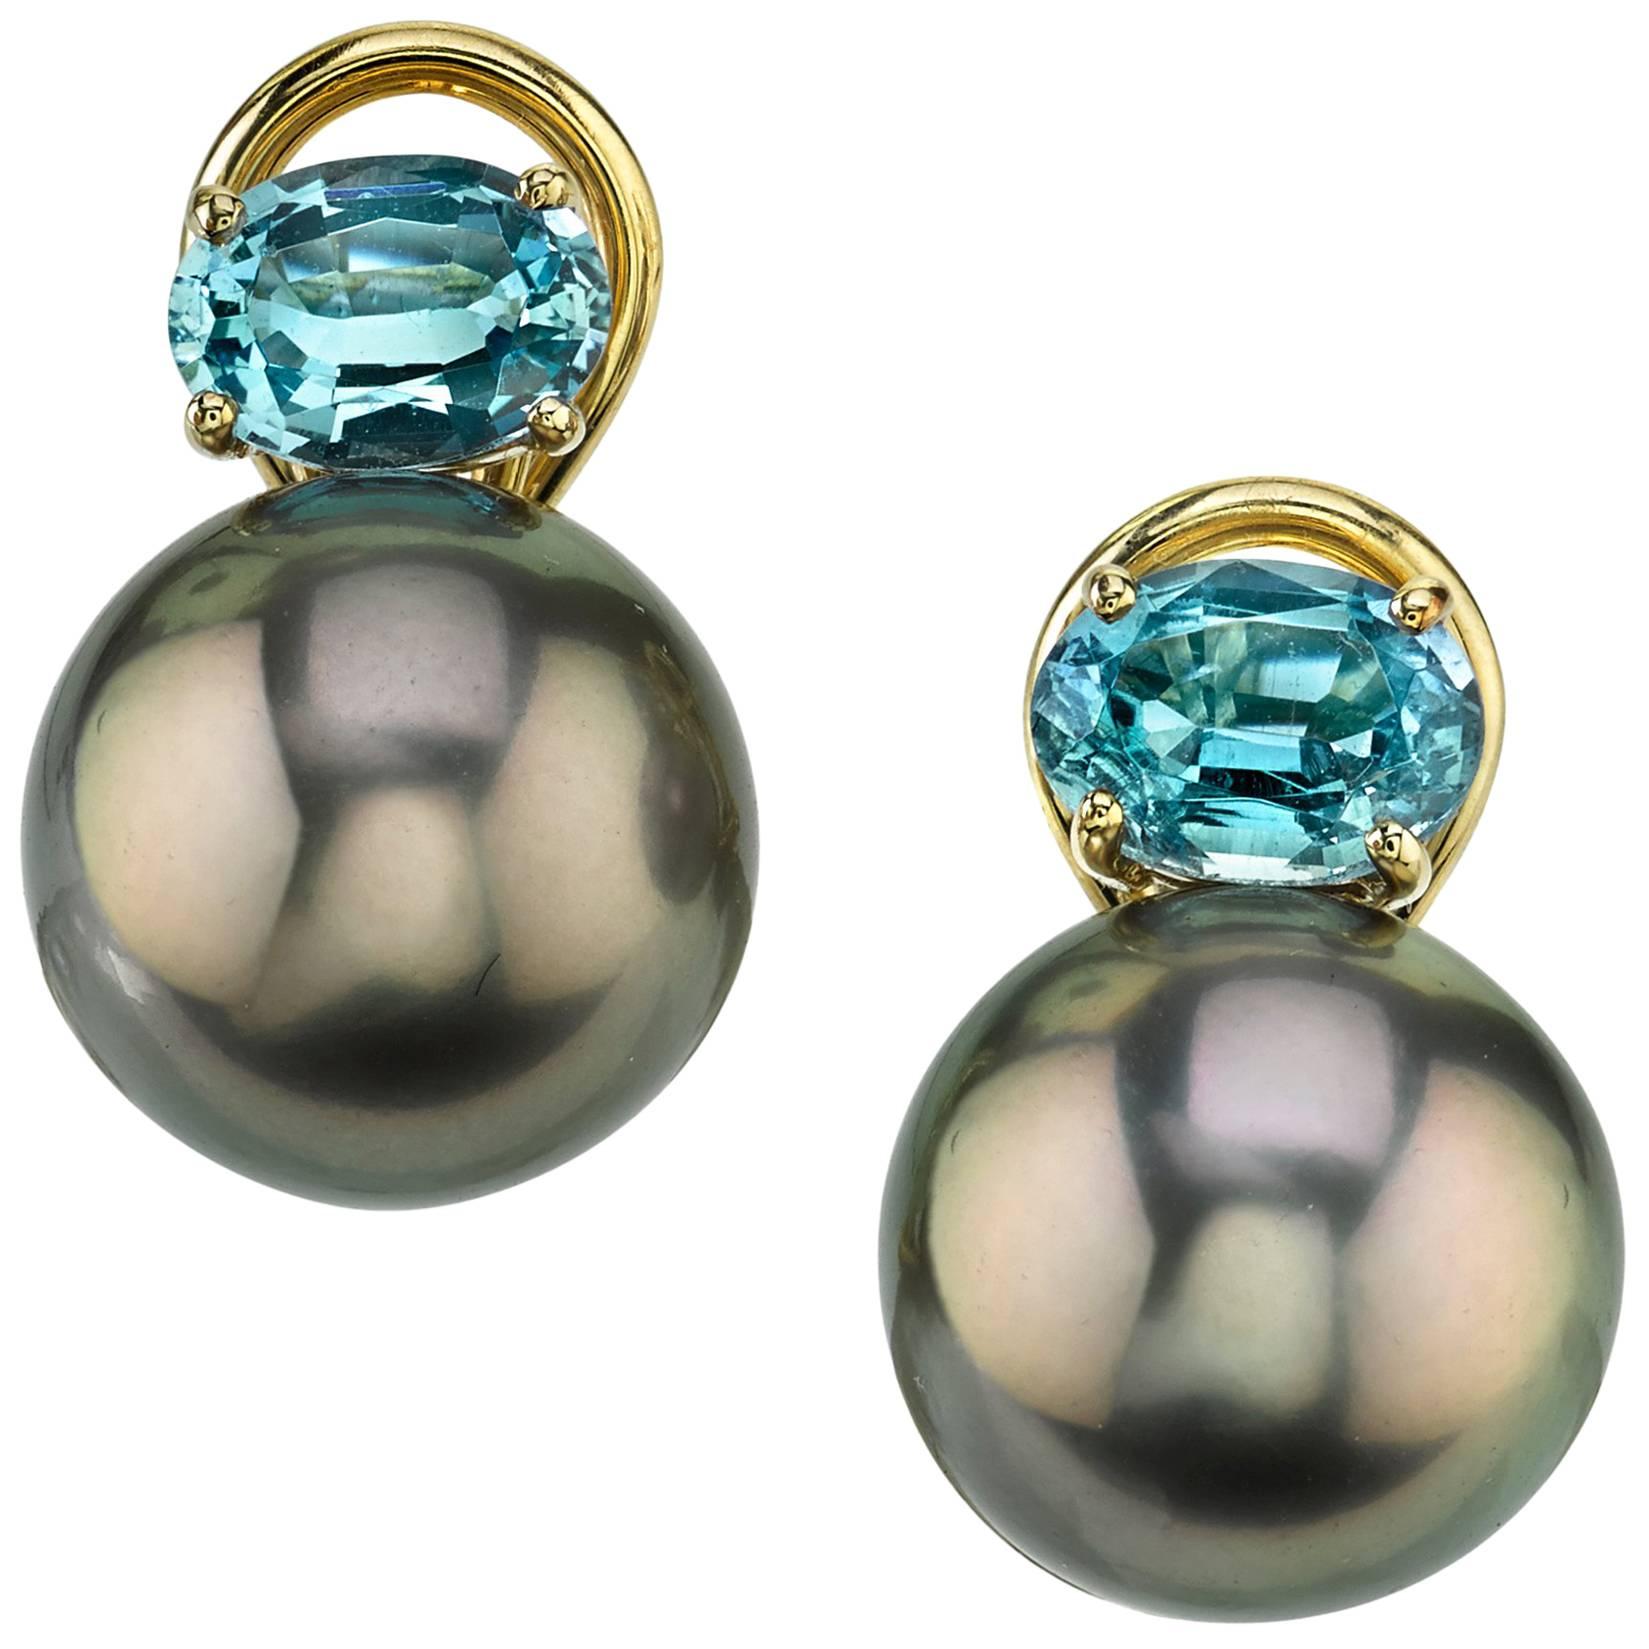 Tahitian Pearls and Oval Aquamarine Earrings 18 Karat Yellow Gold French Clip